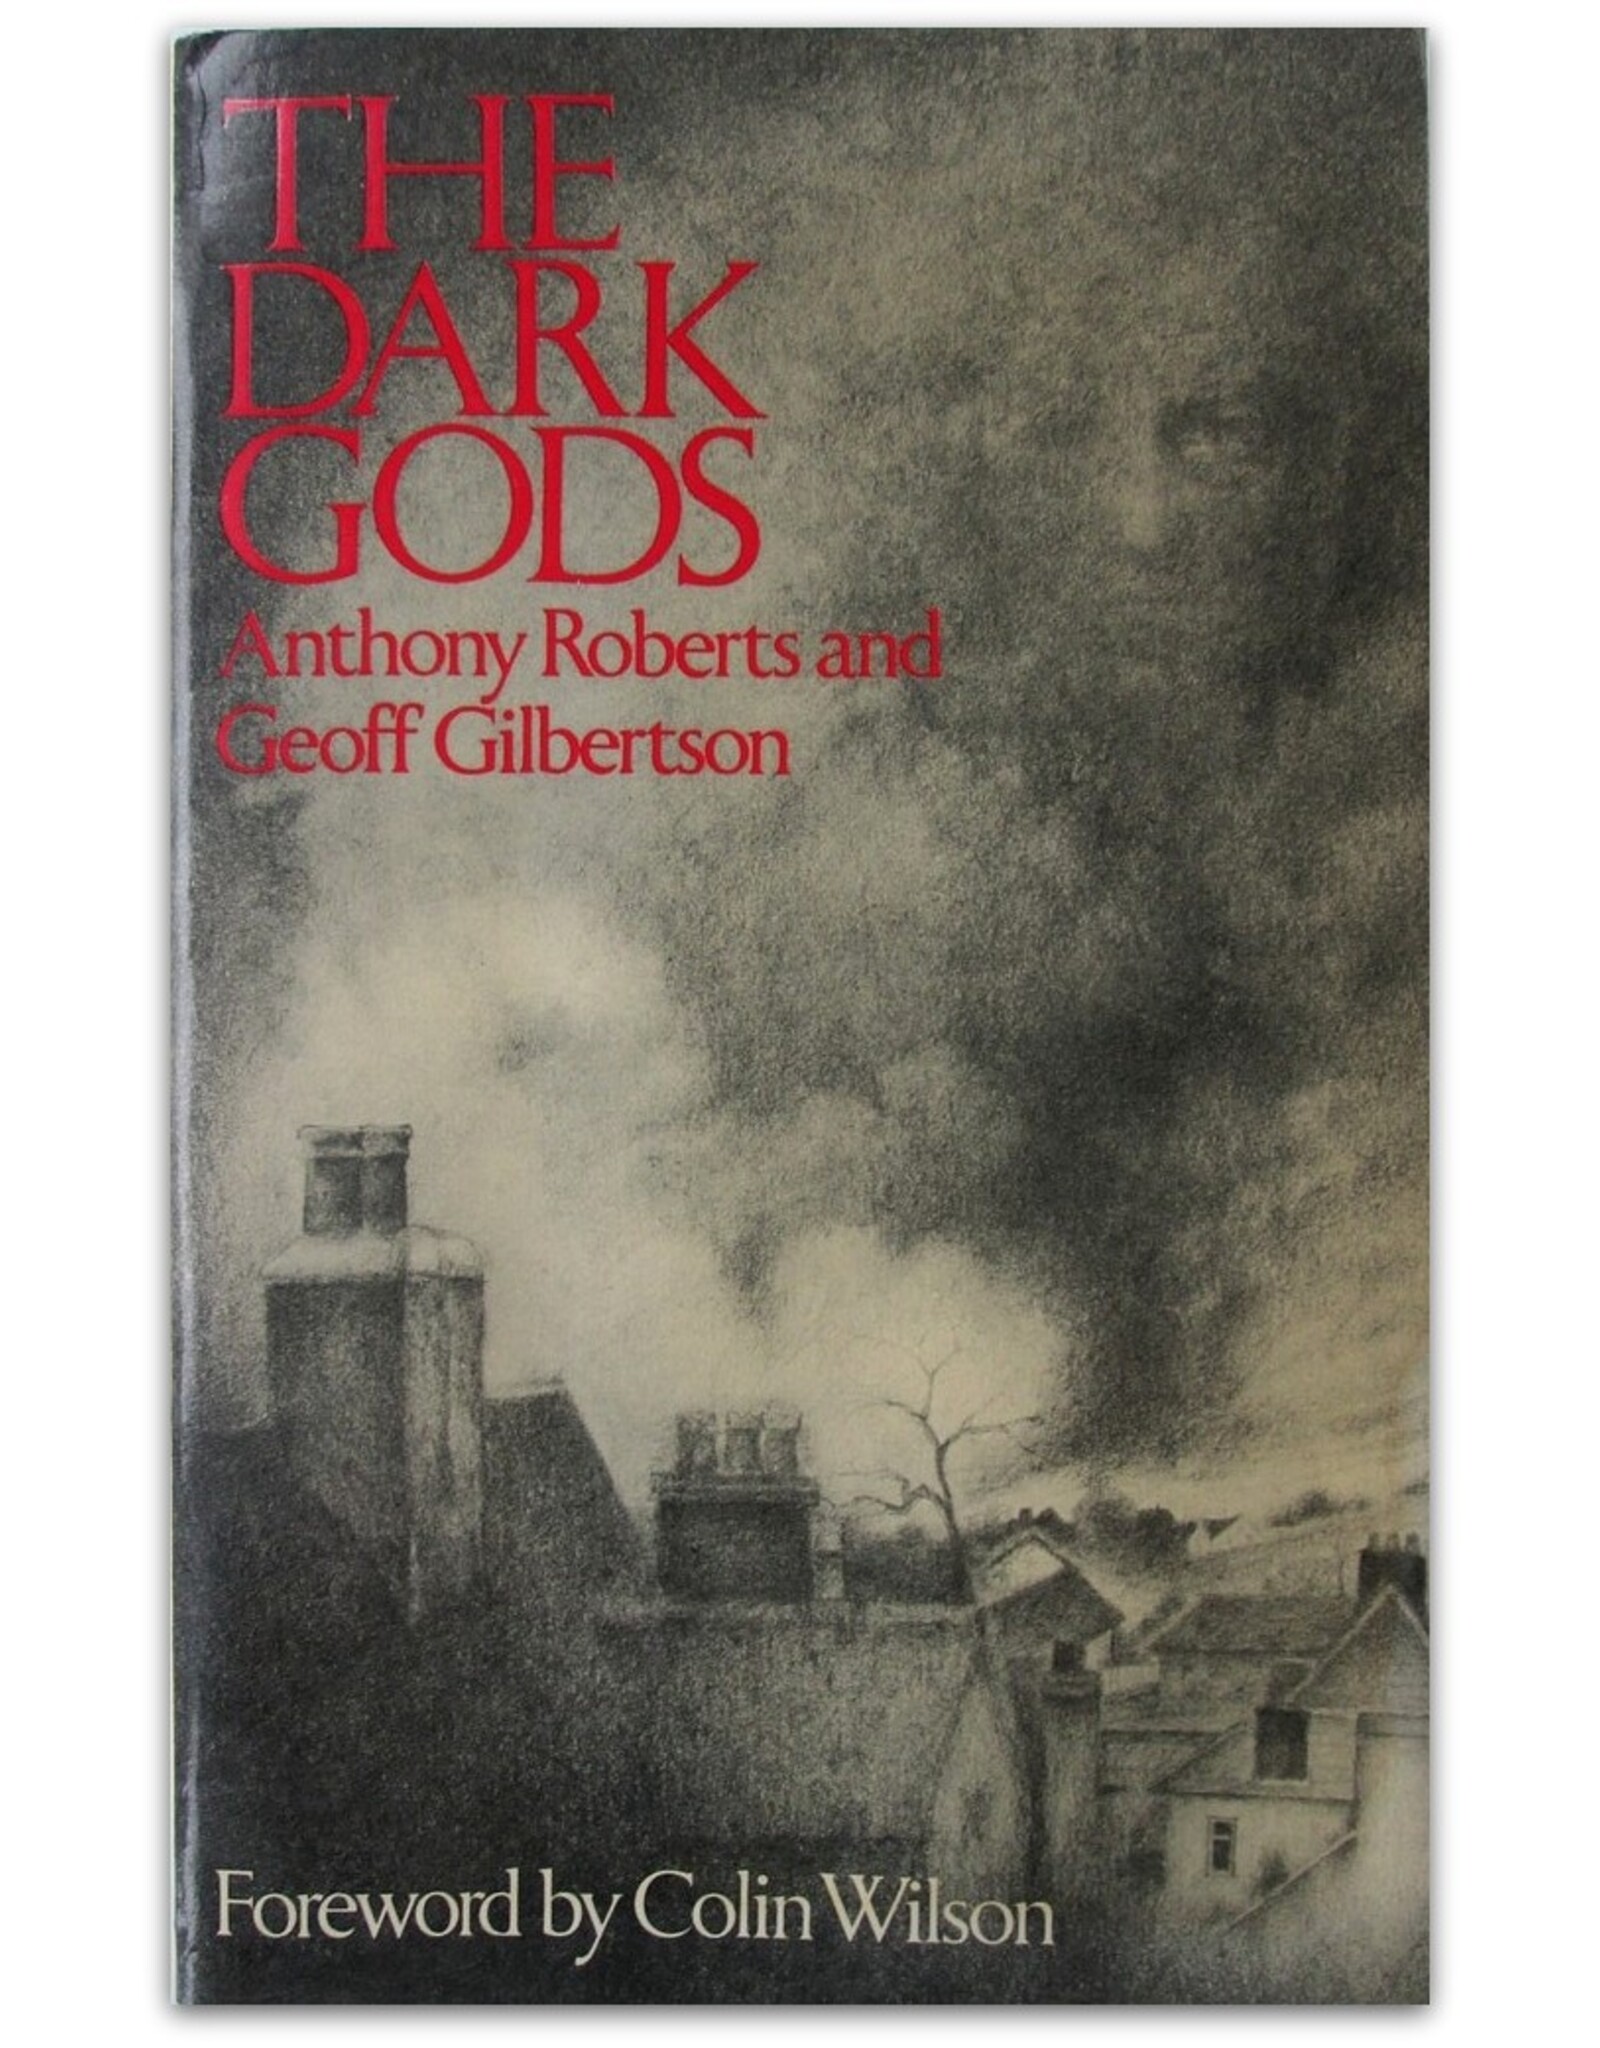 Anthony Roberts & Geoff Gilbertson - The Dark Gods. Foreword by Colin Wilson